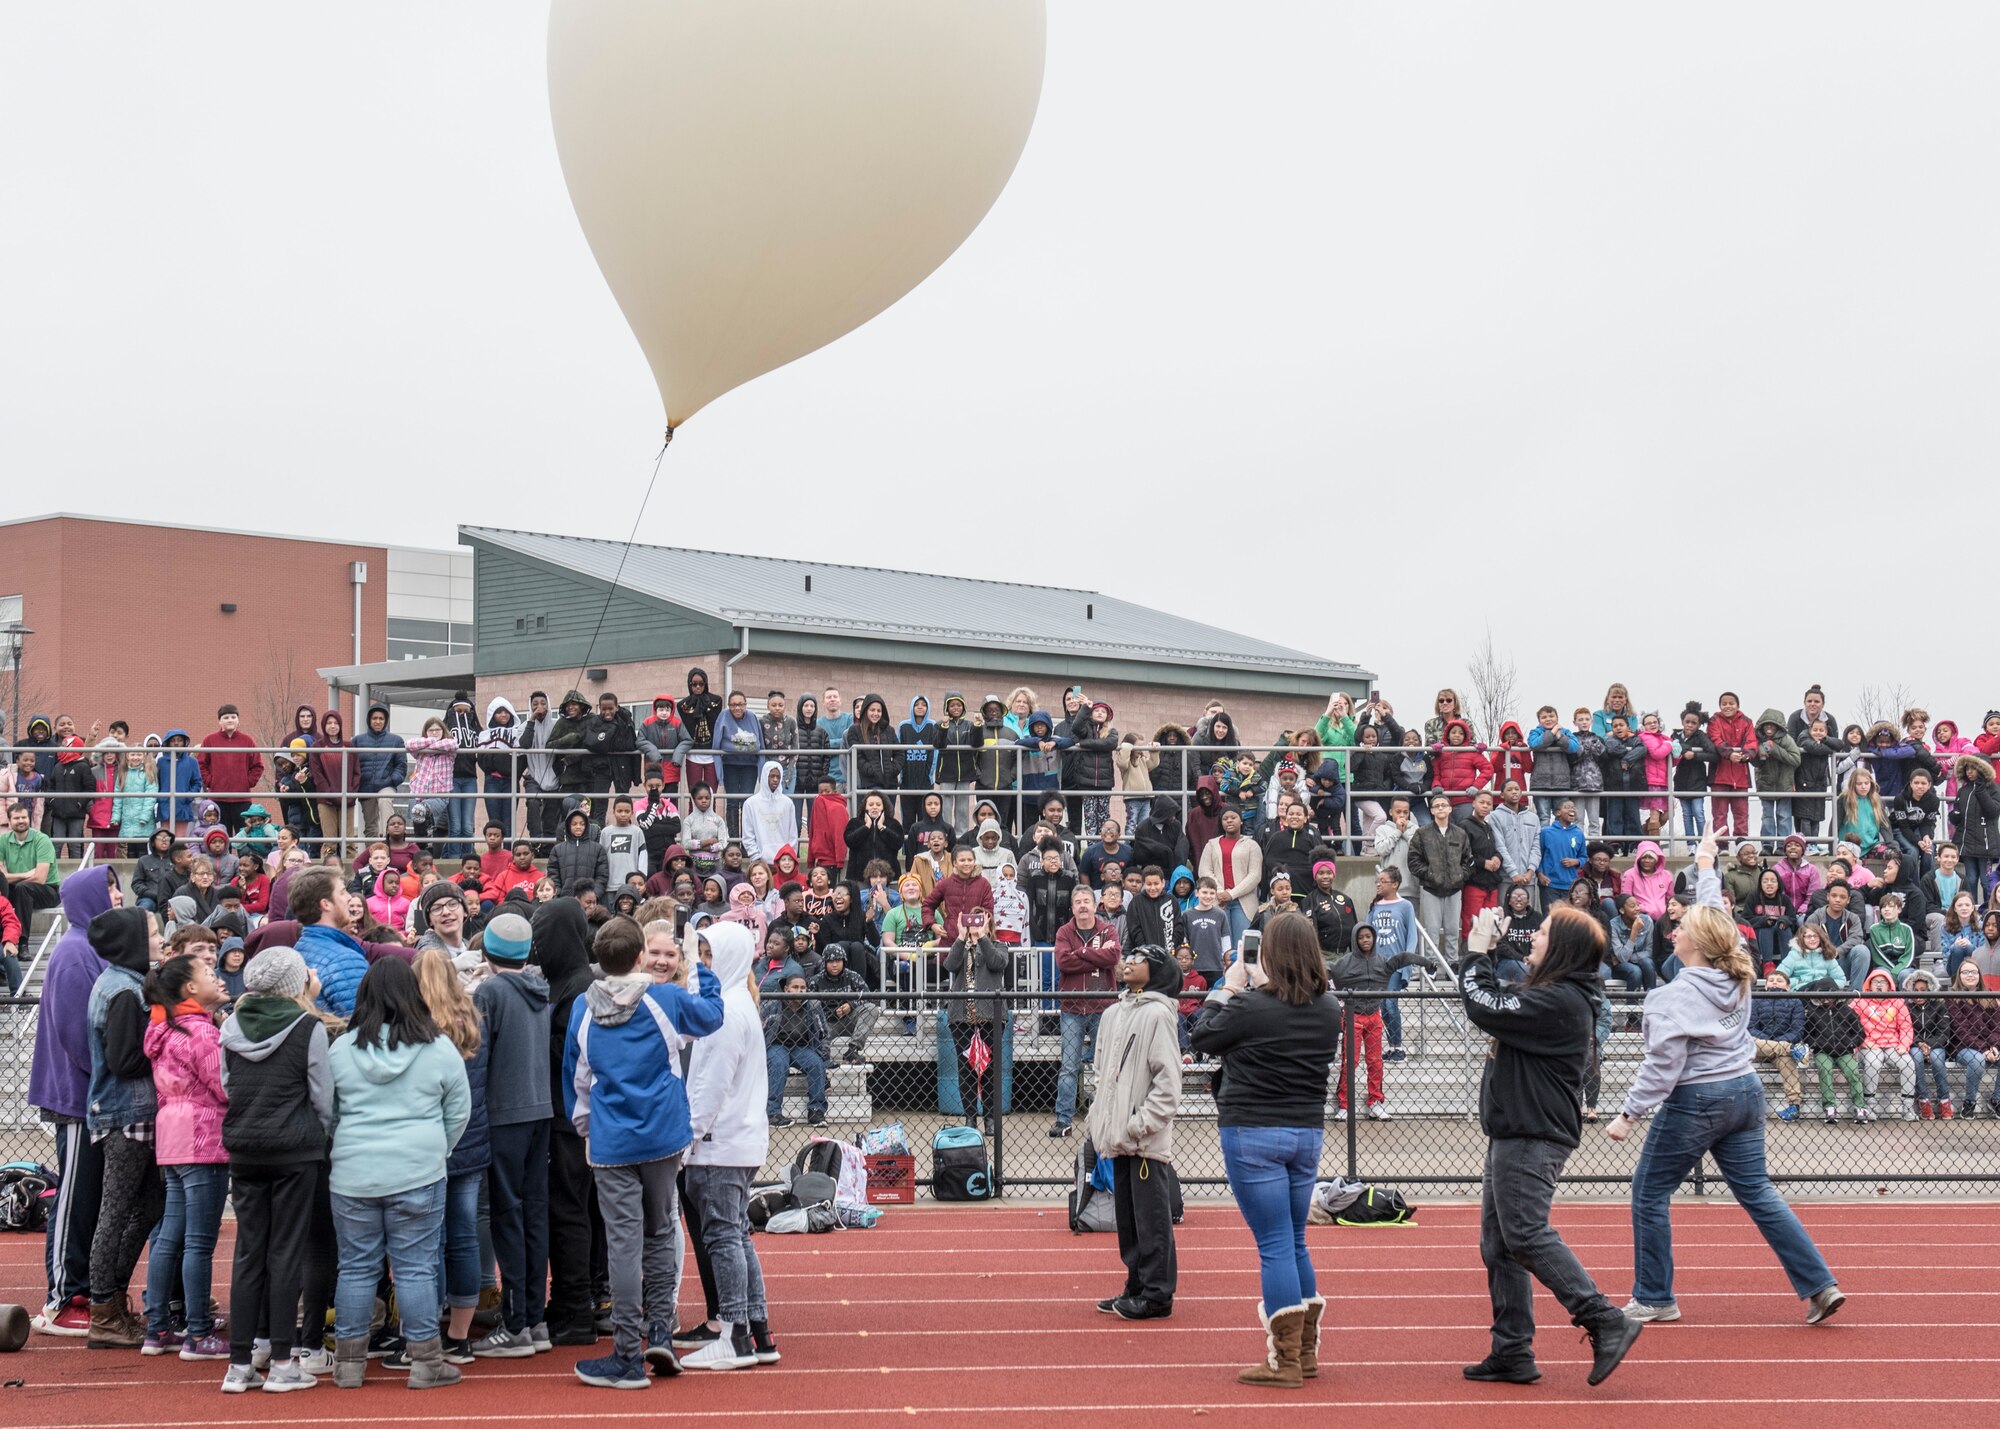 Approximately 650 students watch as eighth graders execute their year-long science, technology, engineering, and mathematics project made possible through an Air Force STEM grant, Nov. 30, 2018, Belleville, Illinois. Three schools, Emge Junior High School, Smithton Middle School and Belle Valley School, worked together to launch a balloon that carried a high-altitude computer, which analyzed data ranging from altitude and coordinates traveled to temperature and pressure. The students found the popped balloon 140 miles away in Mount Carmel, Illinois.